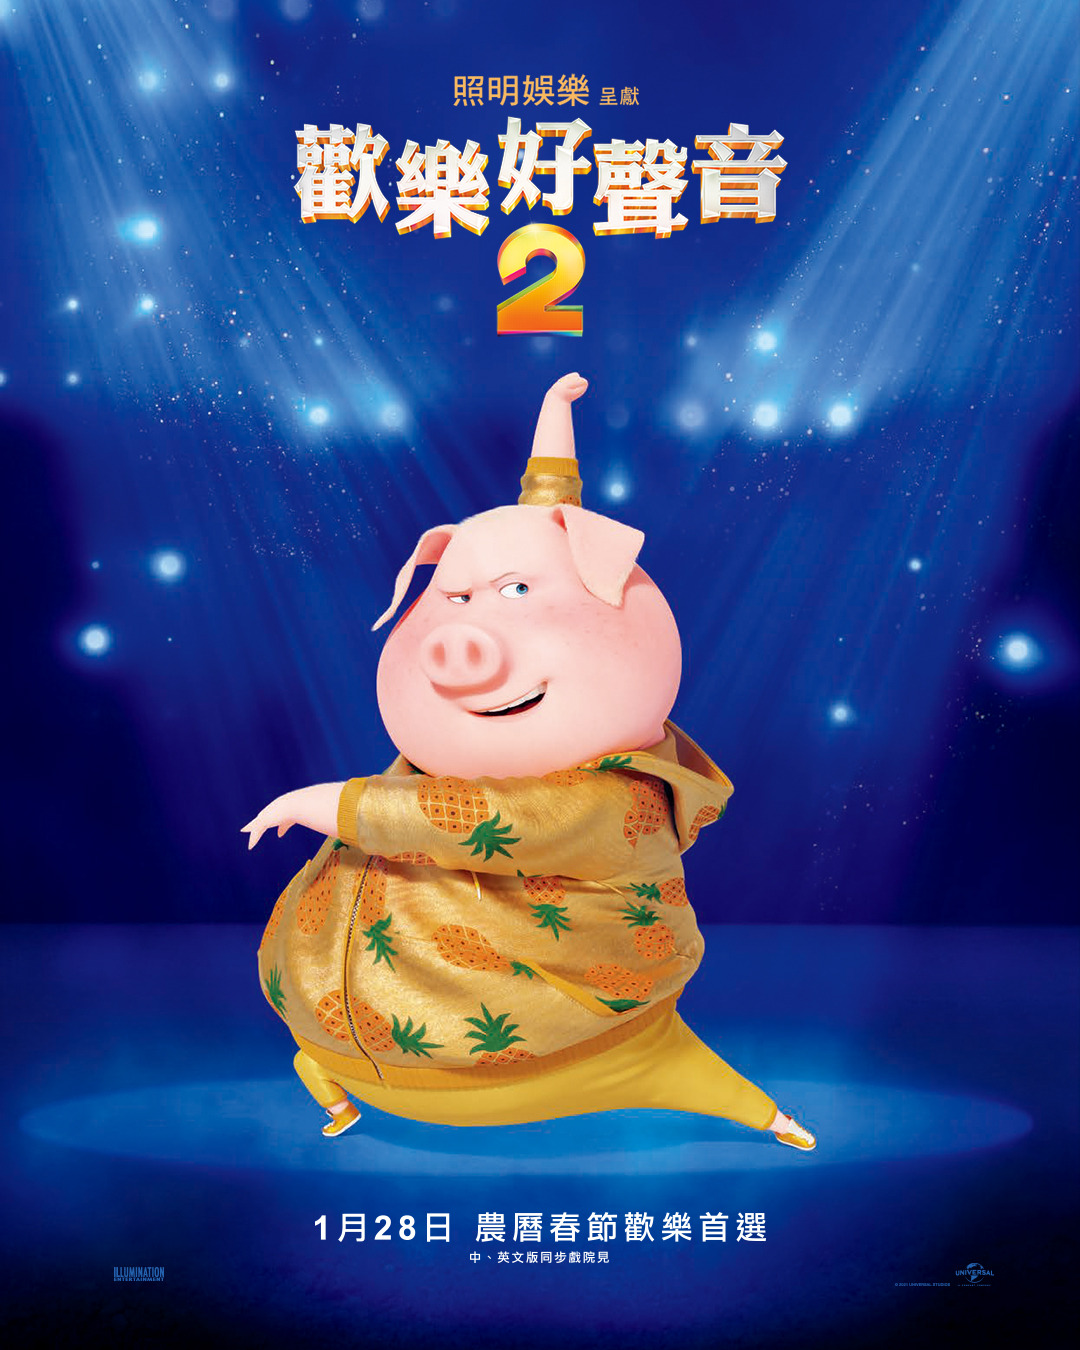 Extra Large Movie Poster Image for Sing 2 (#37 of 38)